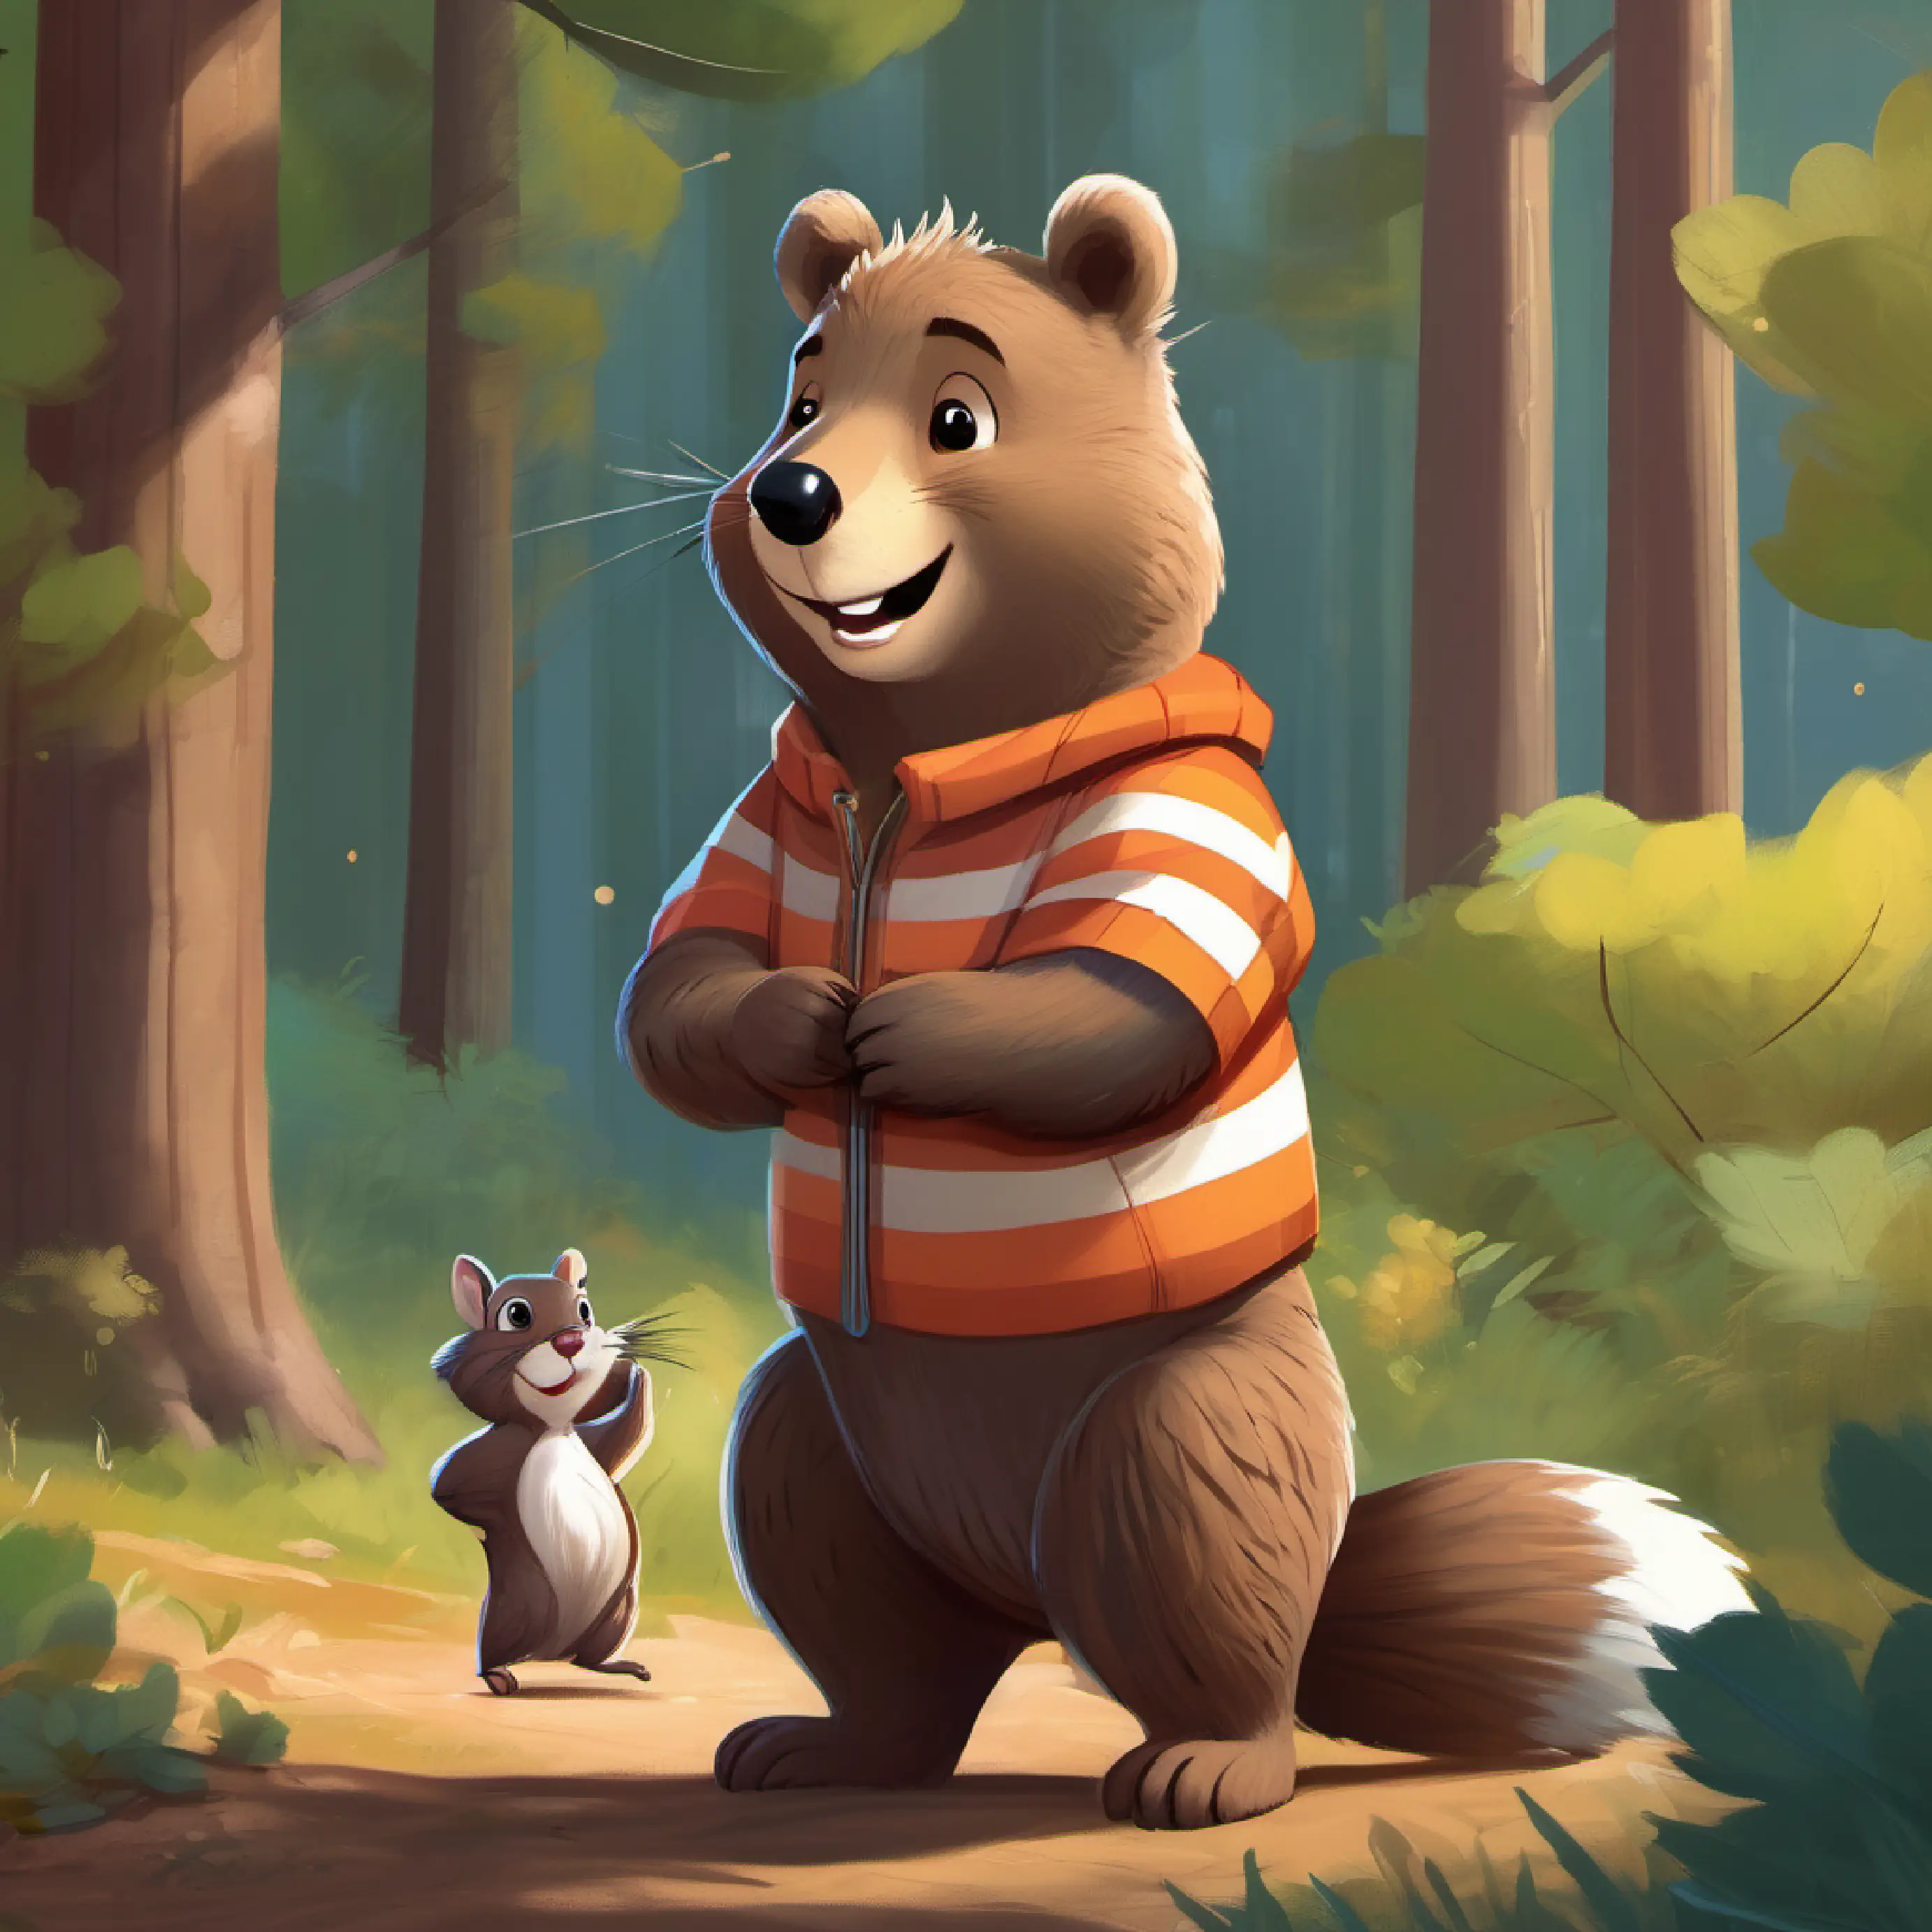 Brown bear with a bright smile and a striped shirt, brown eyes befriends Grey squirrel with a shy demeanor, dark eyes and they play together.